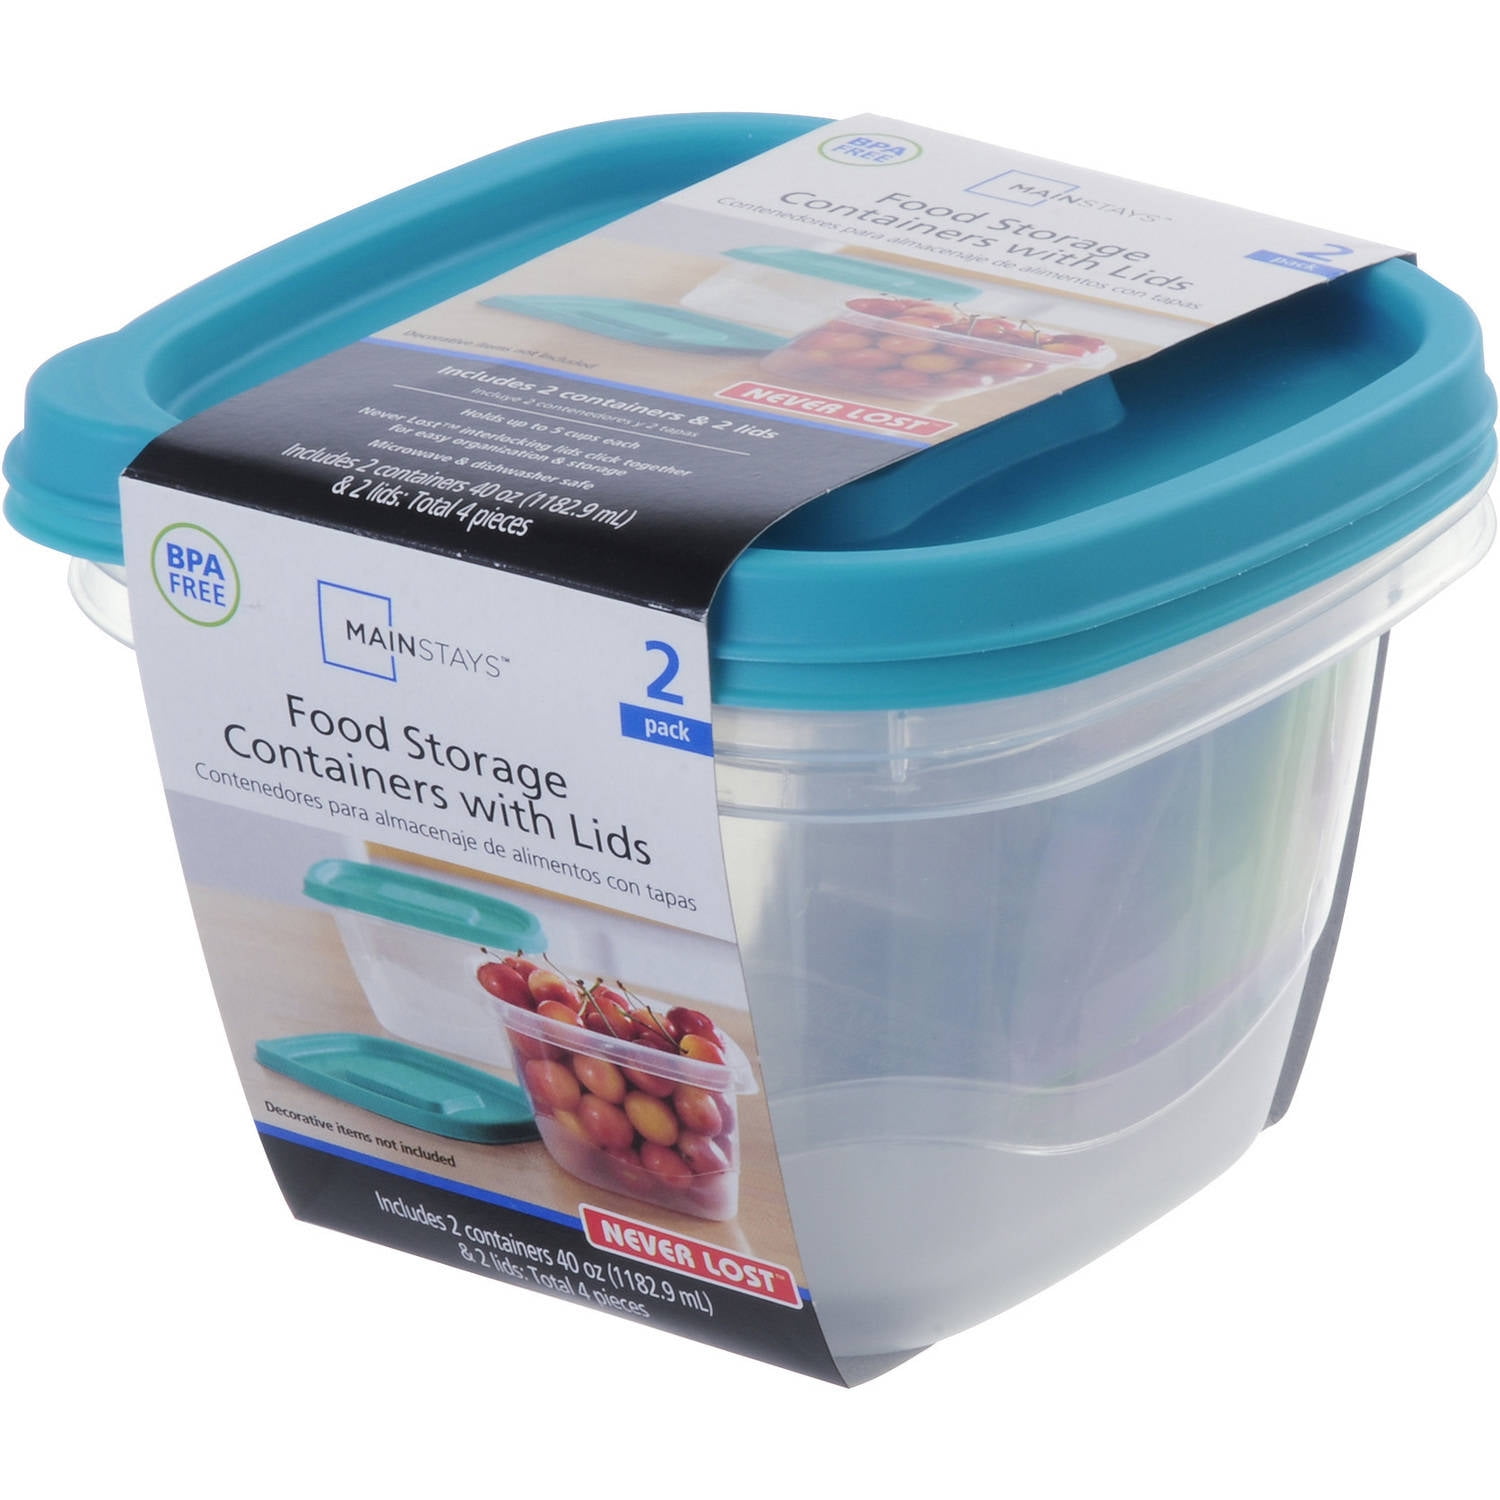 Mainstays Never Lost 40 Oz Food Storage Containers with Lids, 2 count 